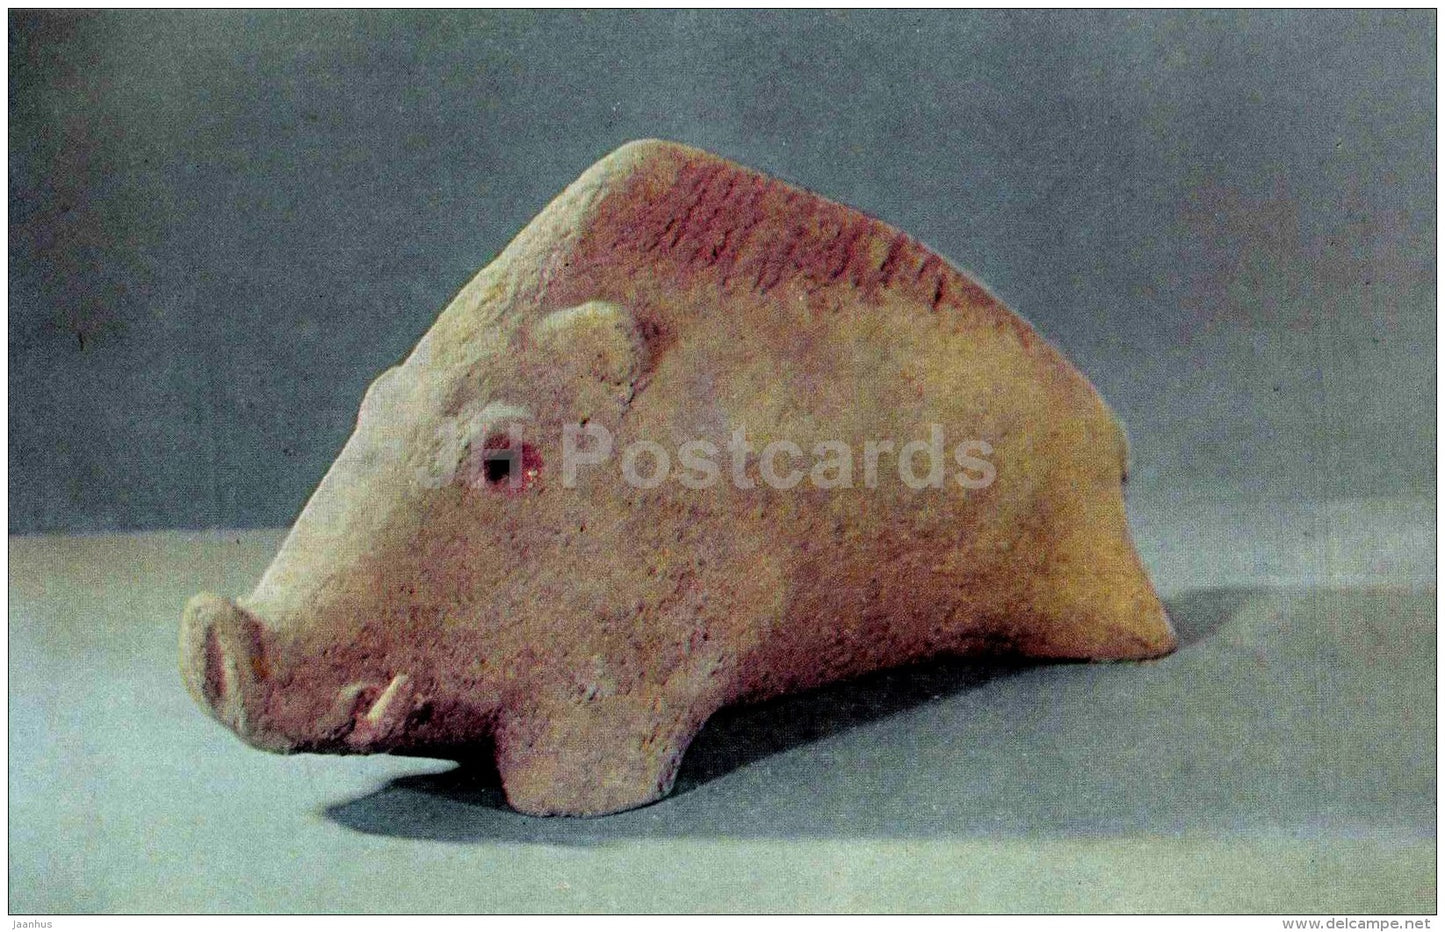 The Boar by S. Sulkhanishvili - fire clay - Stamping and Ceramics of Georgia - 1968 - Georgia USSR - unused - JH Postcards